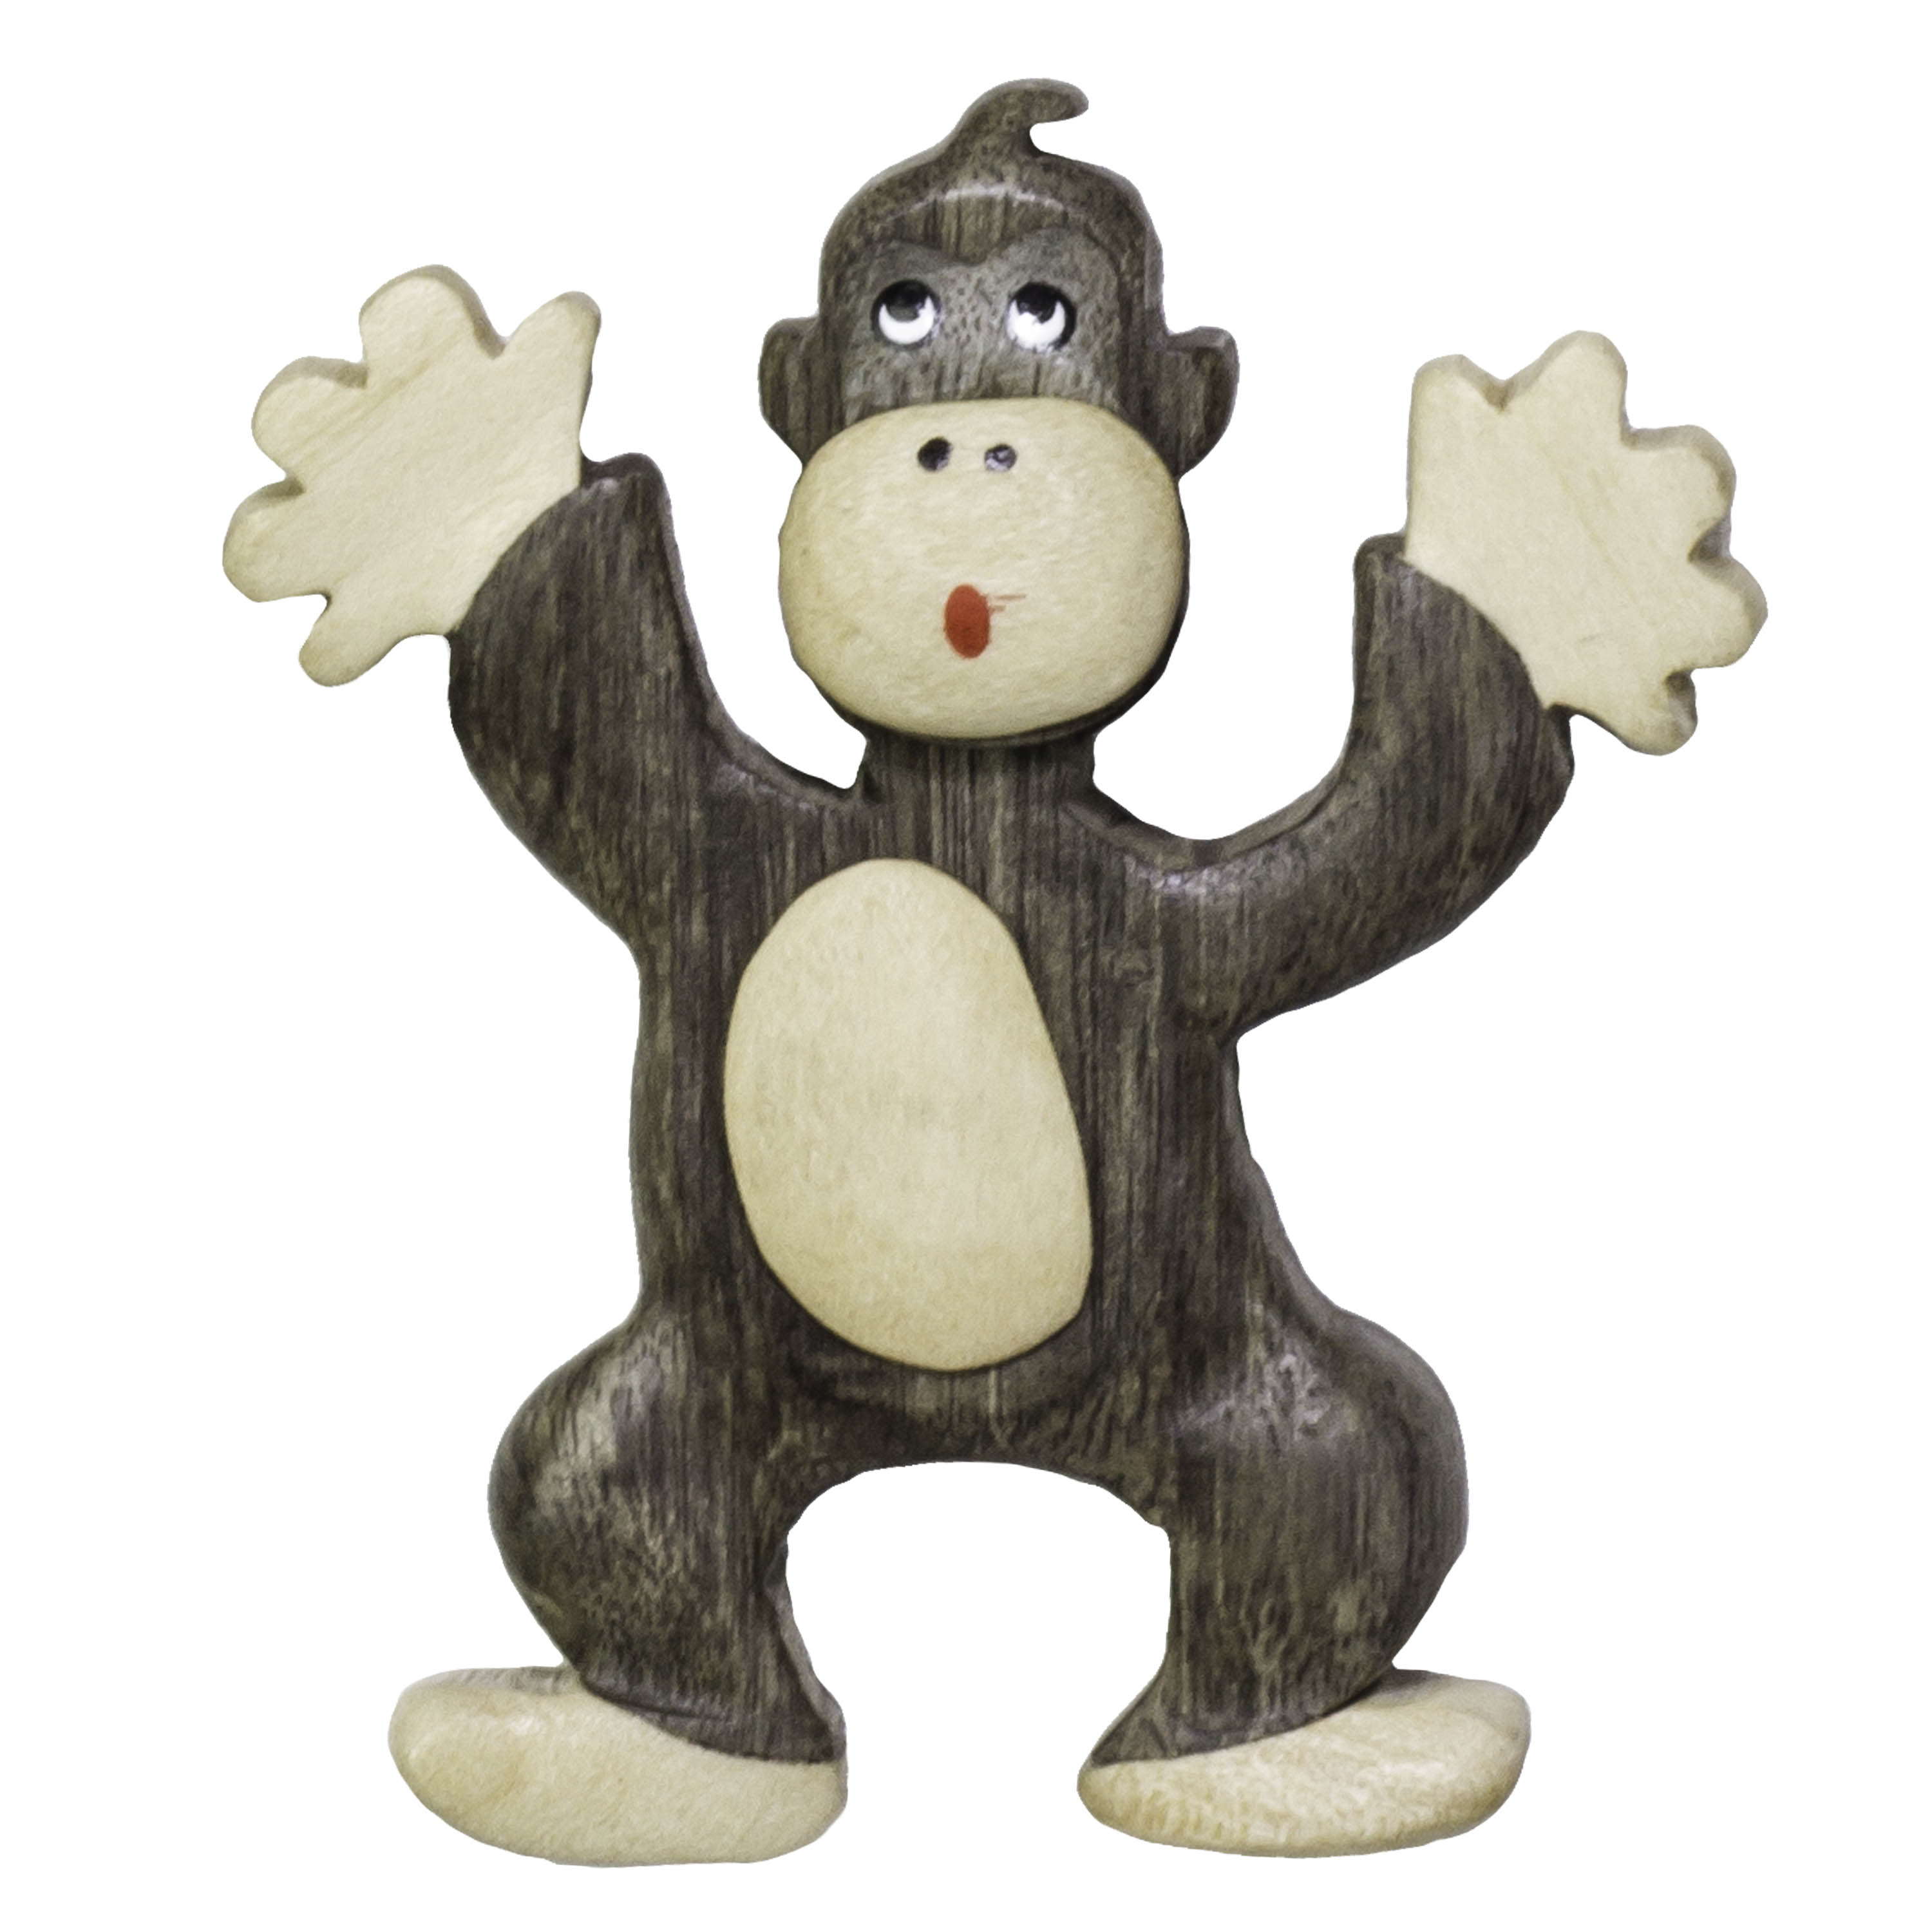 Bao-Monkey Jumping magnet (3 pieces)